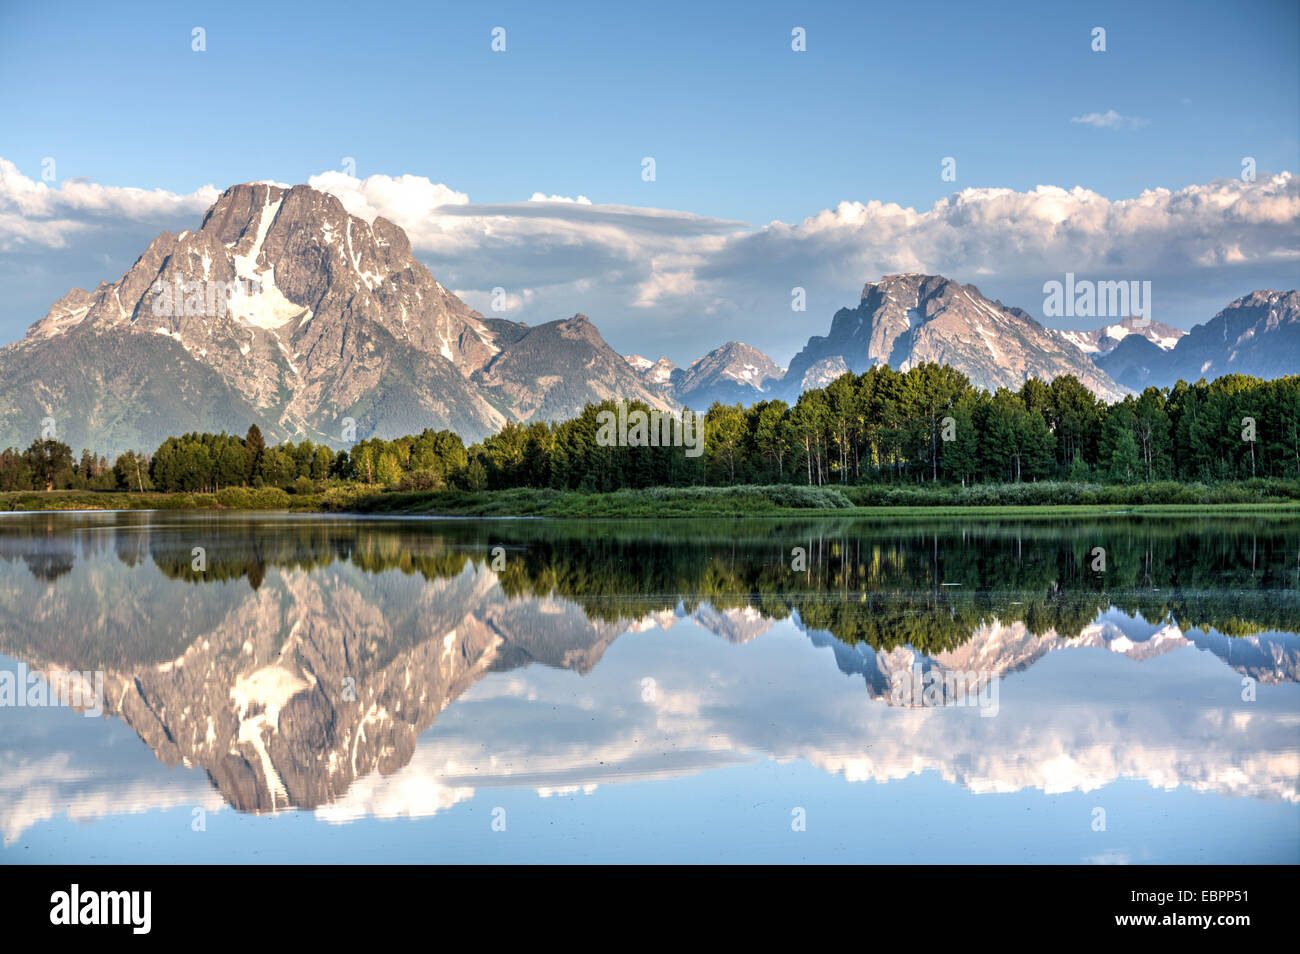 Water reflection of Mount Moran, taken from Oxbow Bend Turnout, Grand Teton National Park, Wyoming, United States of America Stock Photo